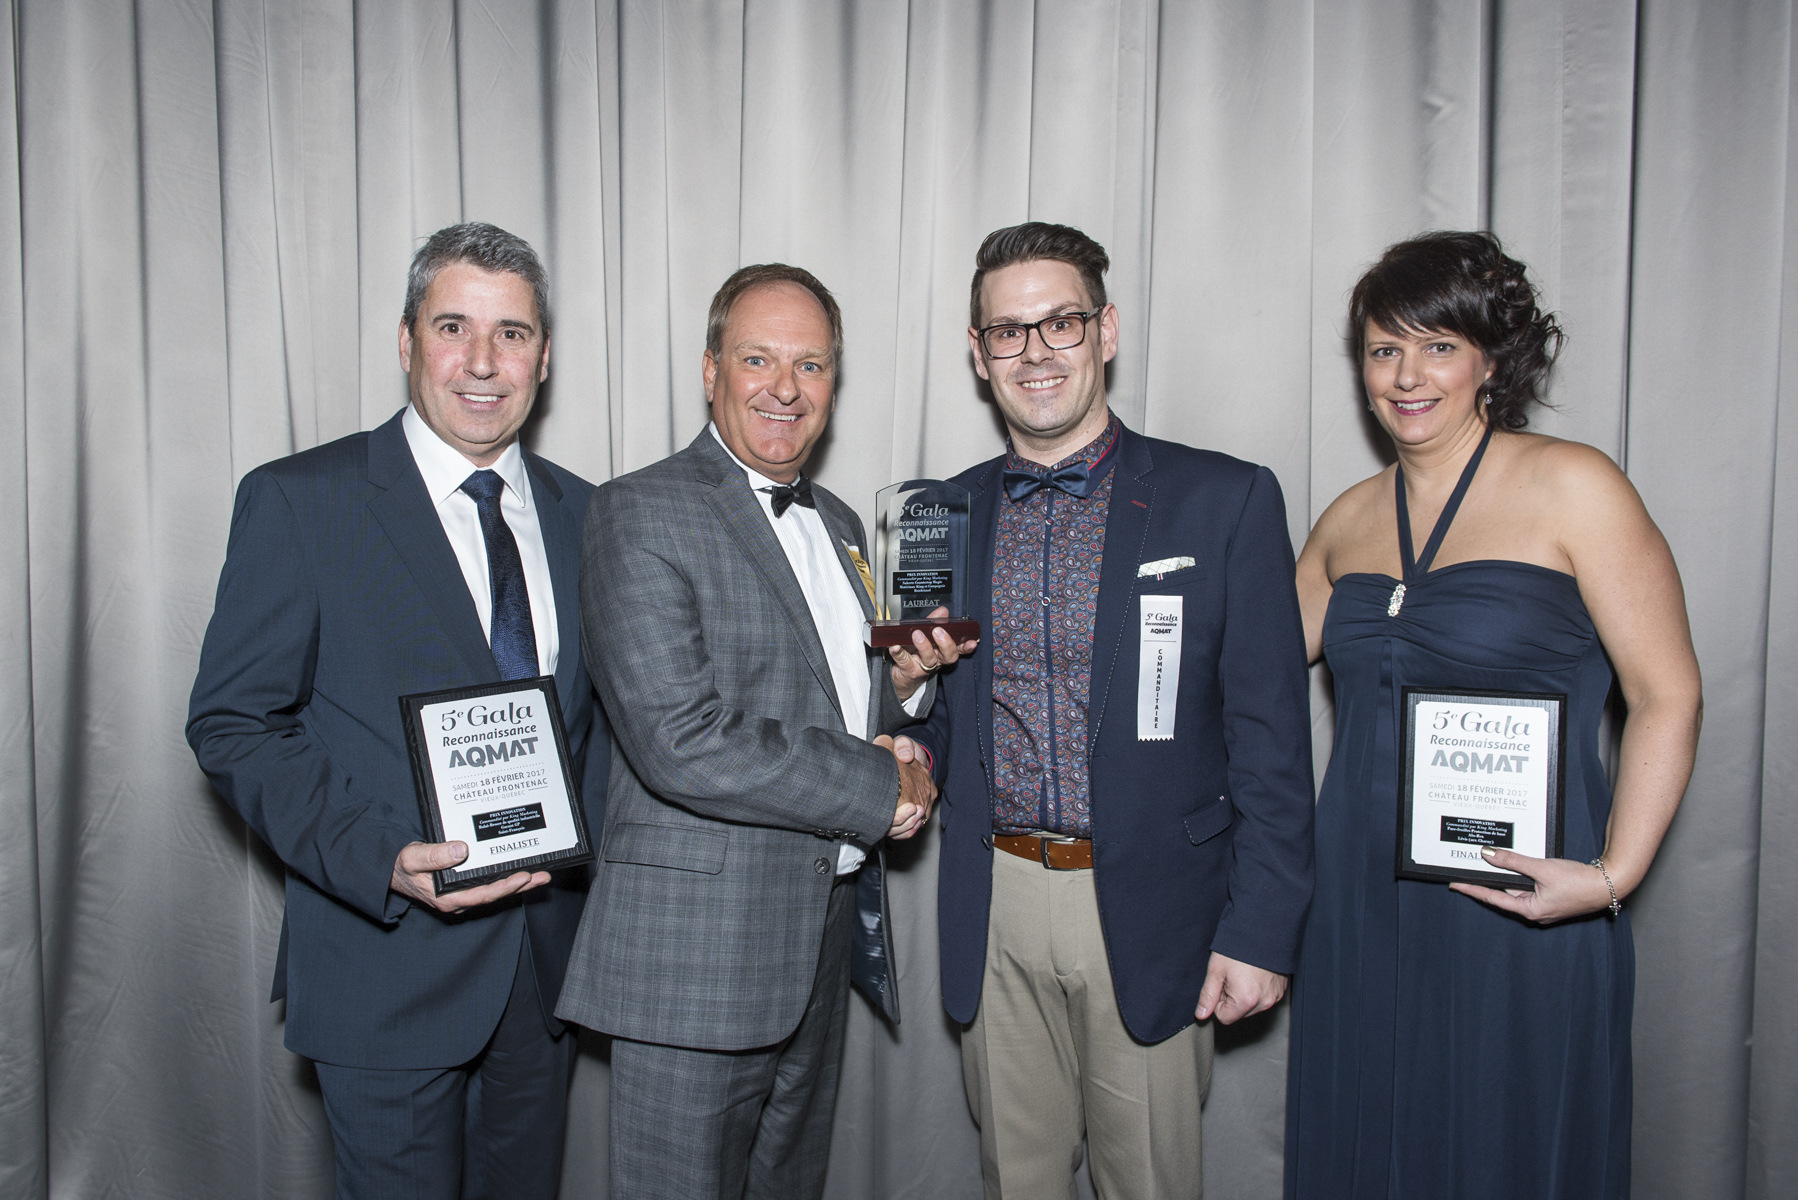 King Home Improvement Product Group Receives AQMAT Innovation Award